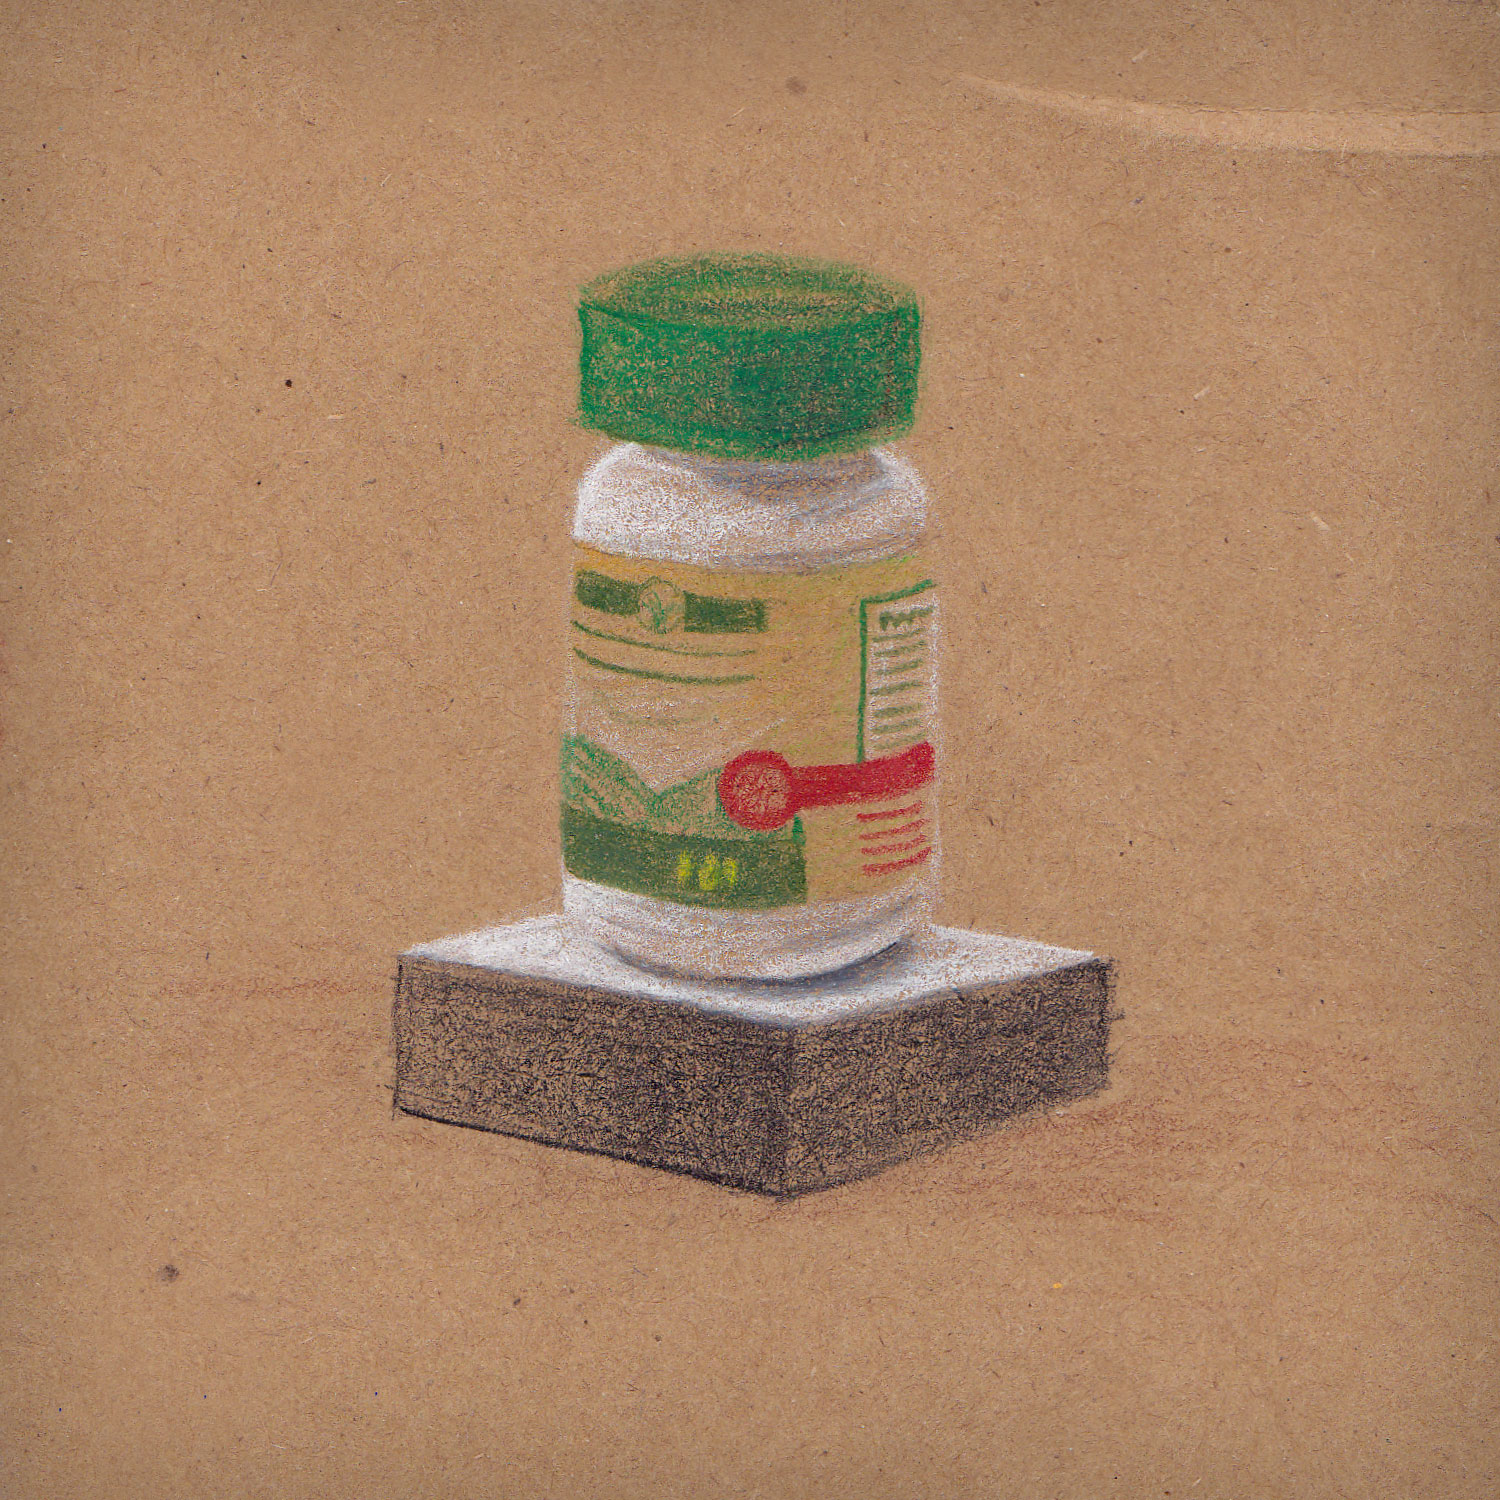 colored pencil drawing of a vitamin bottle